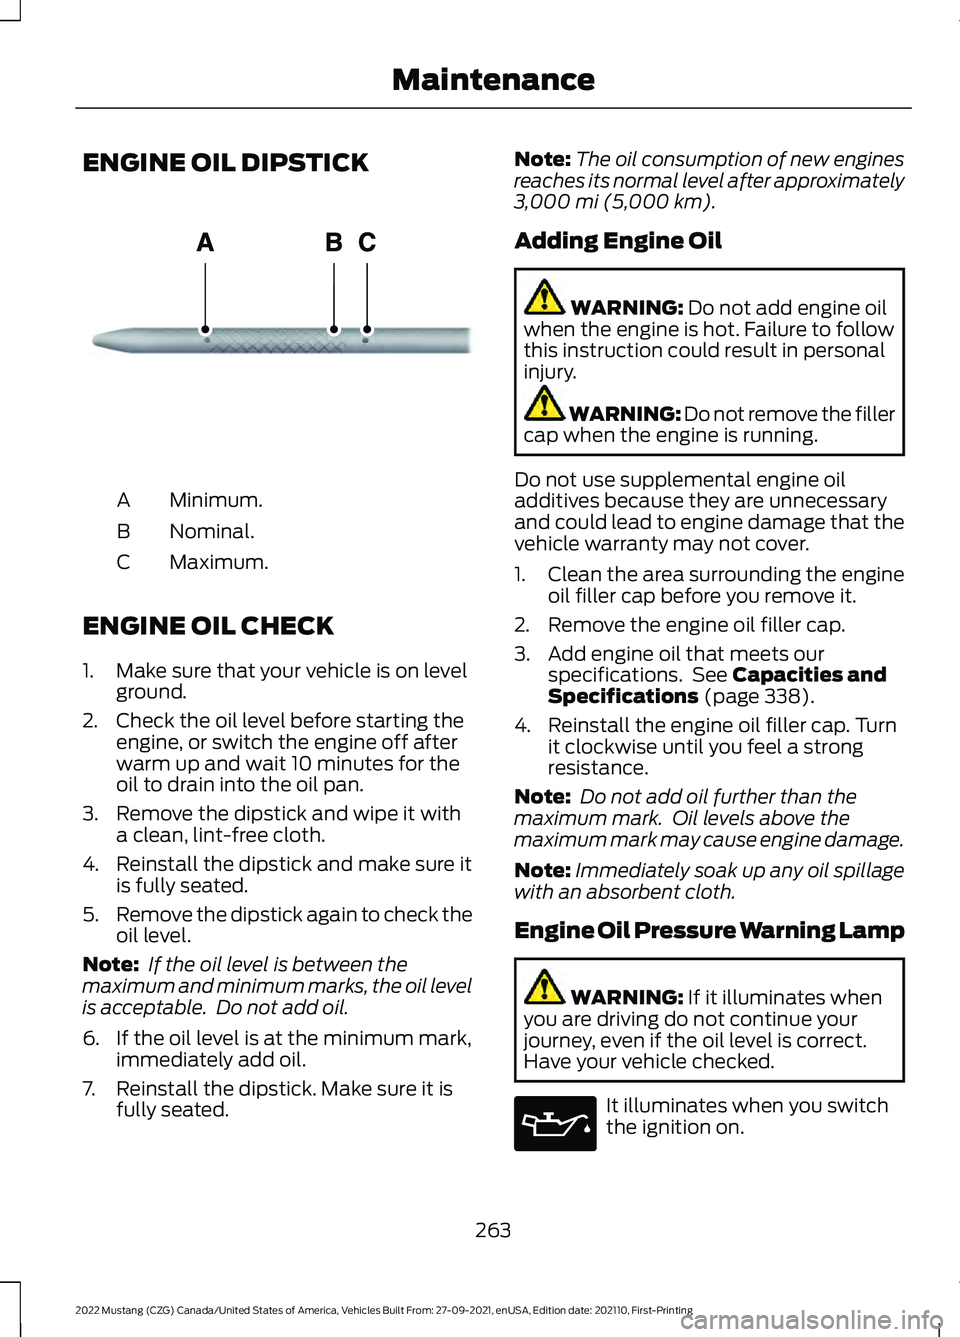 FORD MUSTANG 2022  Owners Manual ENGINE OIL DIPSTICK
Minimum.
A
Nominal.
B
Maximum.
C
ENGINE OIL CHECK
1. Make sure that your vehicle is on level ground.
2. Check the oil level before starting the engine, or switch the engine off aft